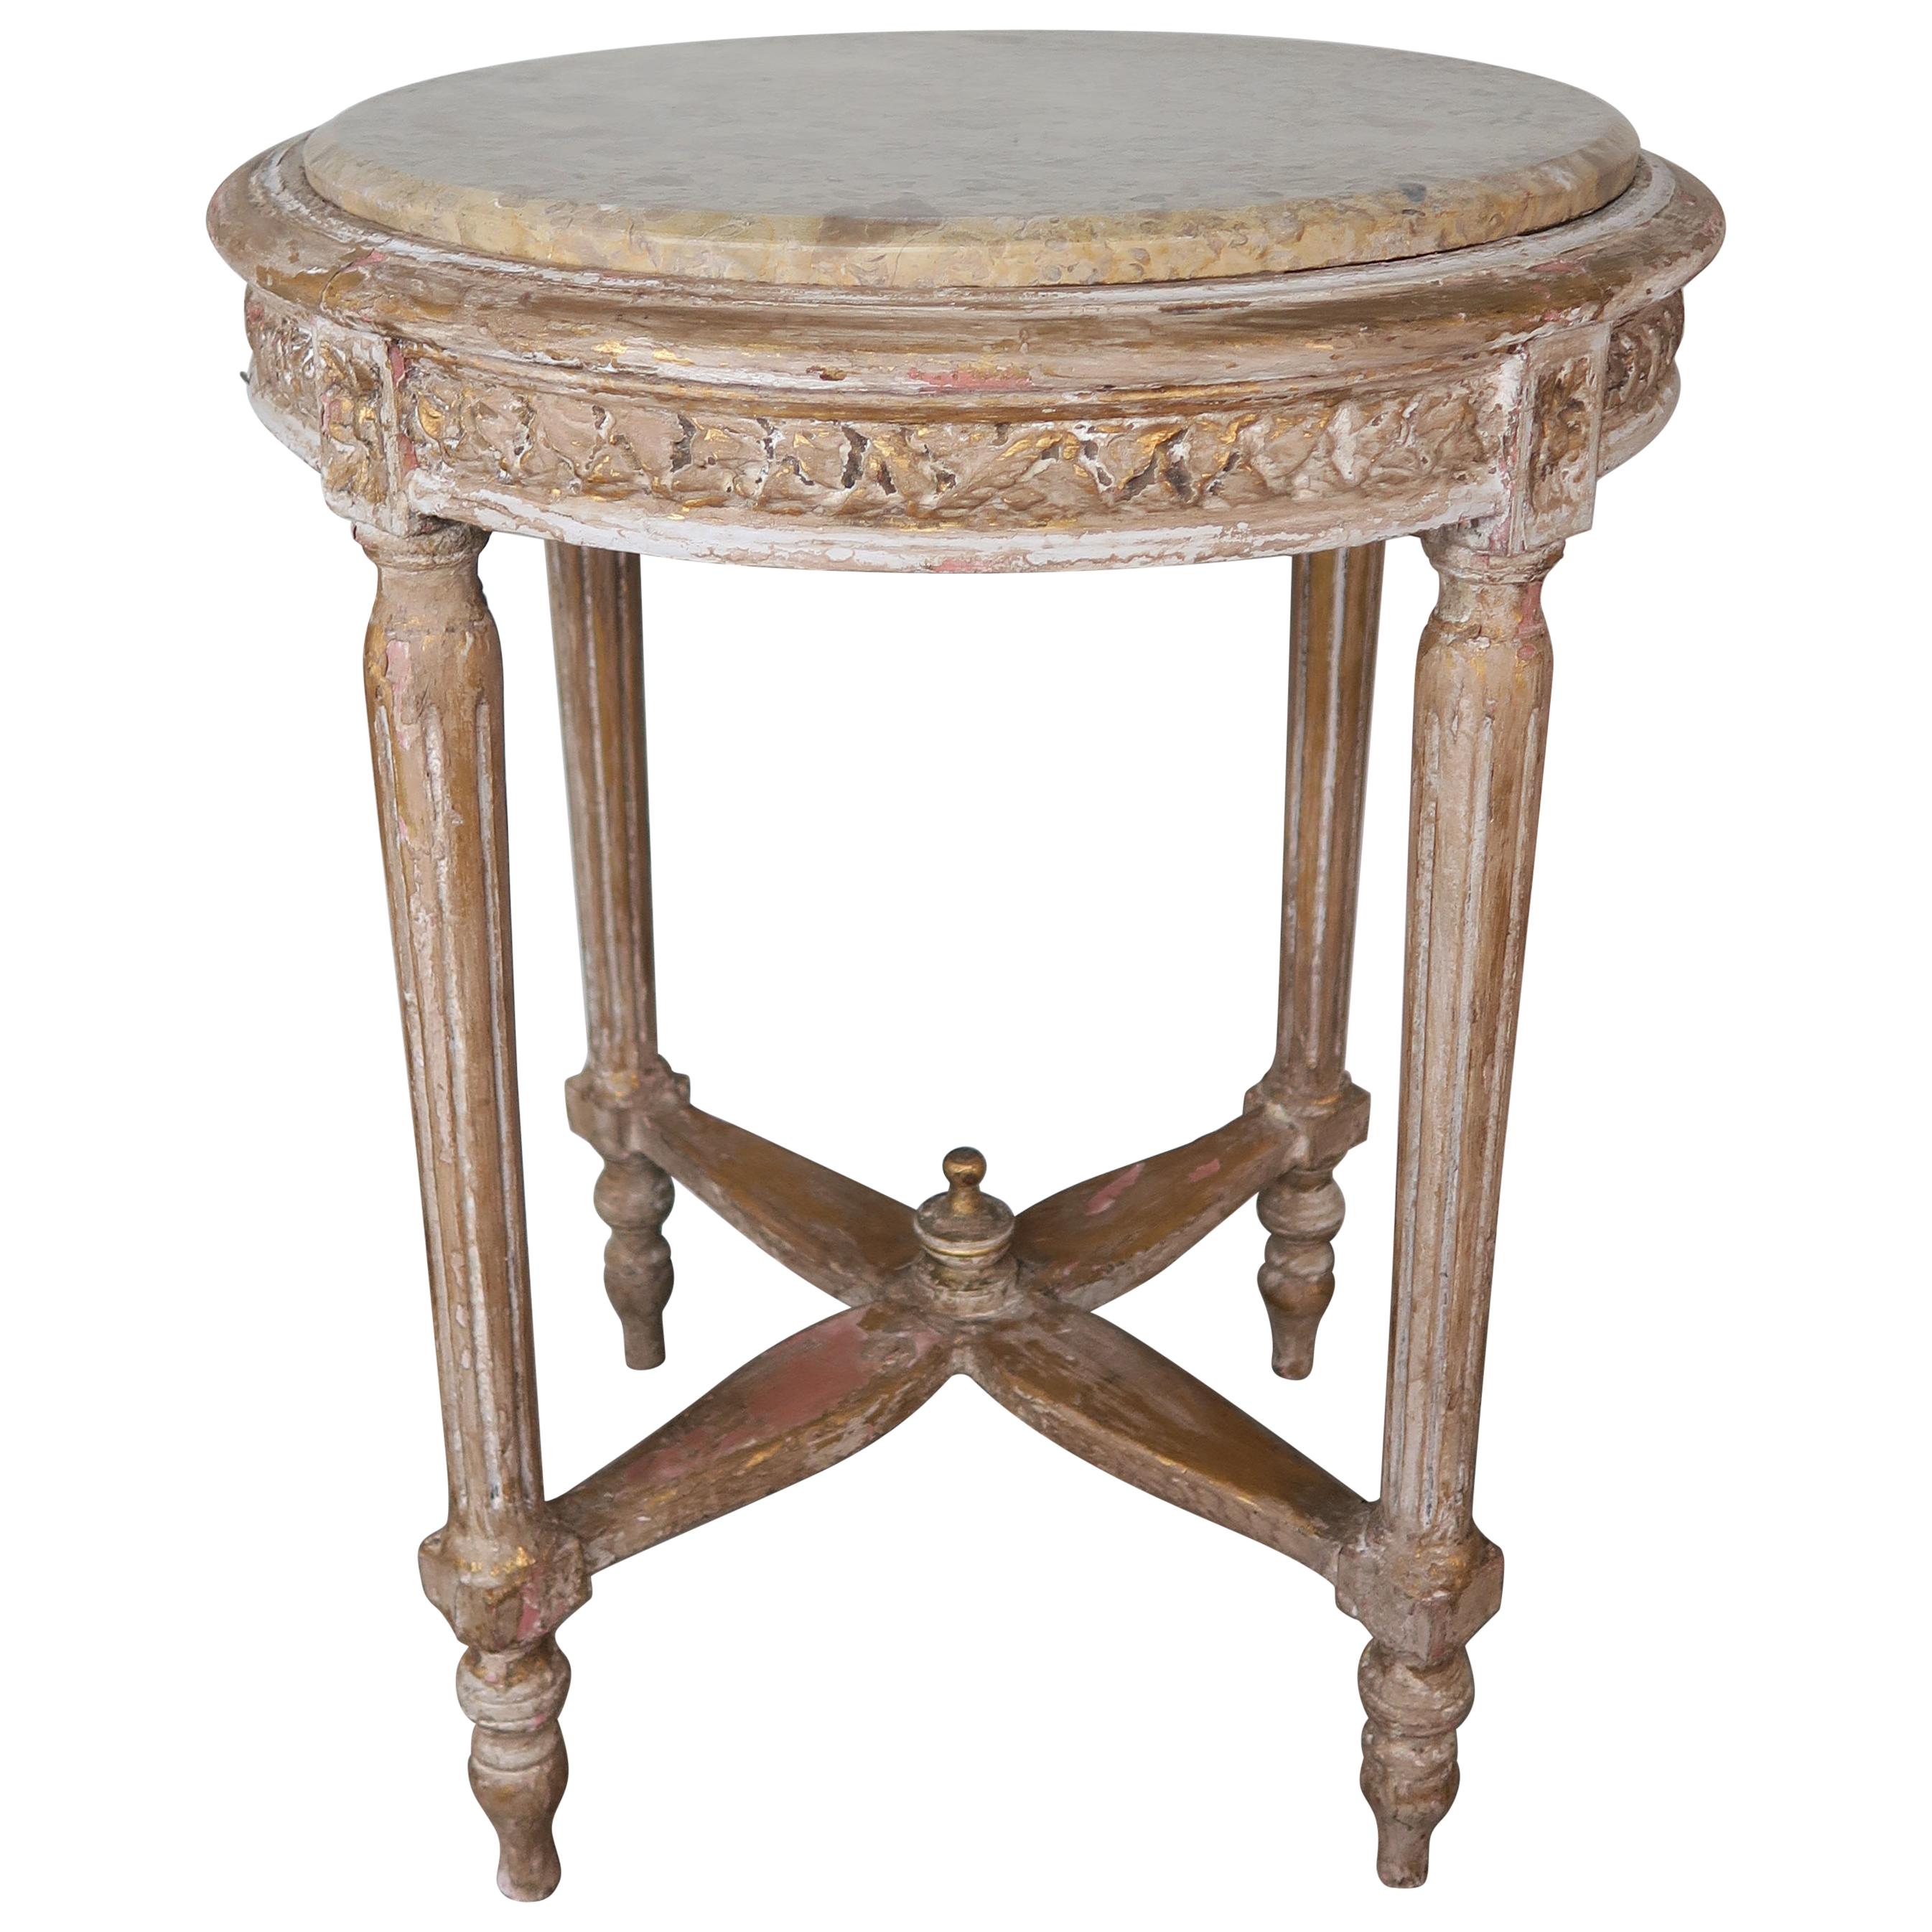 French Louis XVI Style Side Table with Marble Top